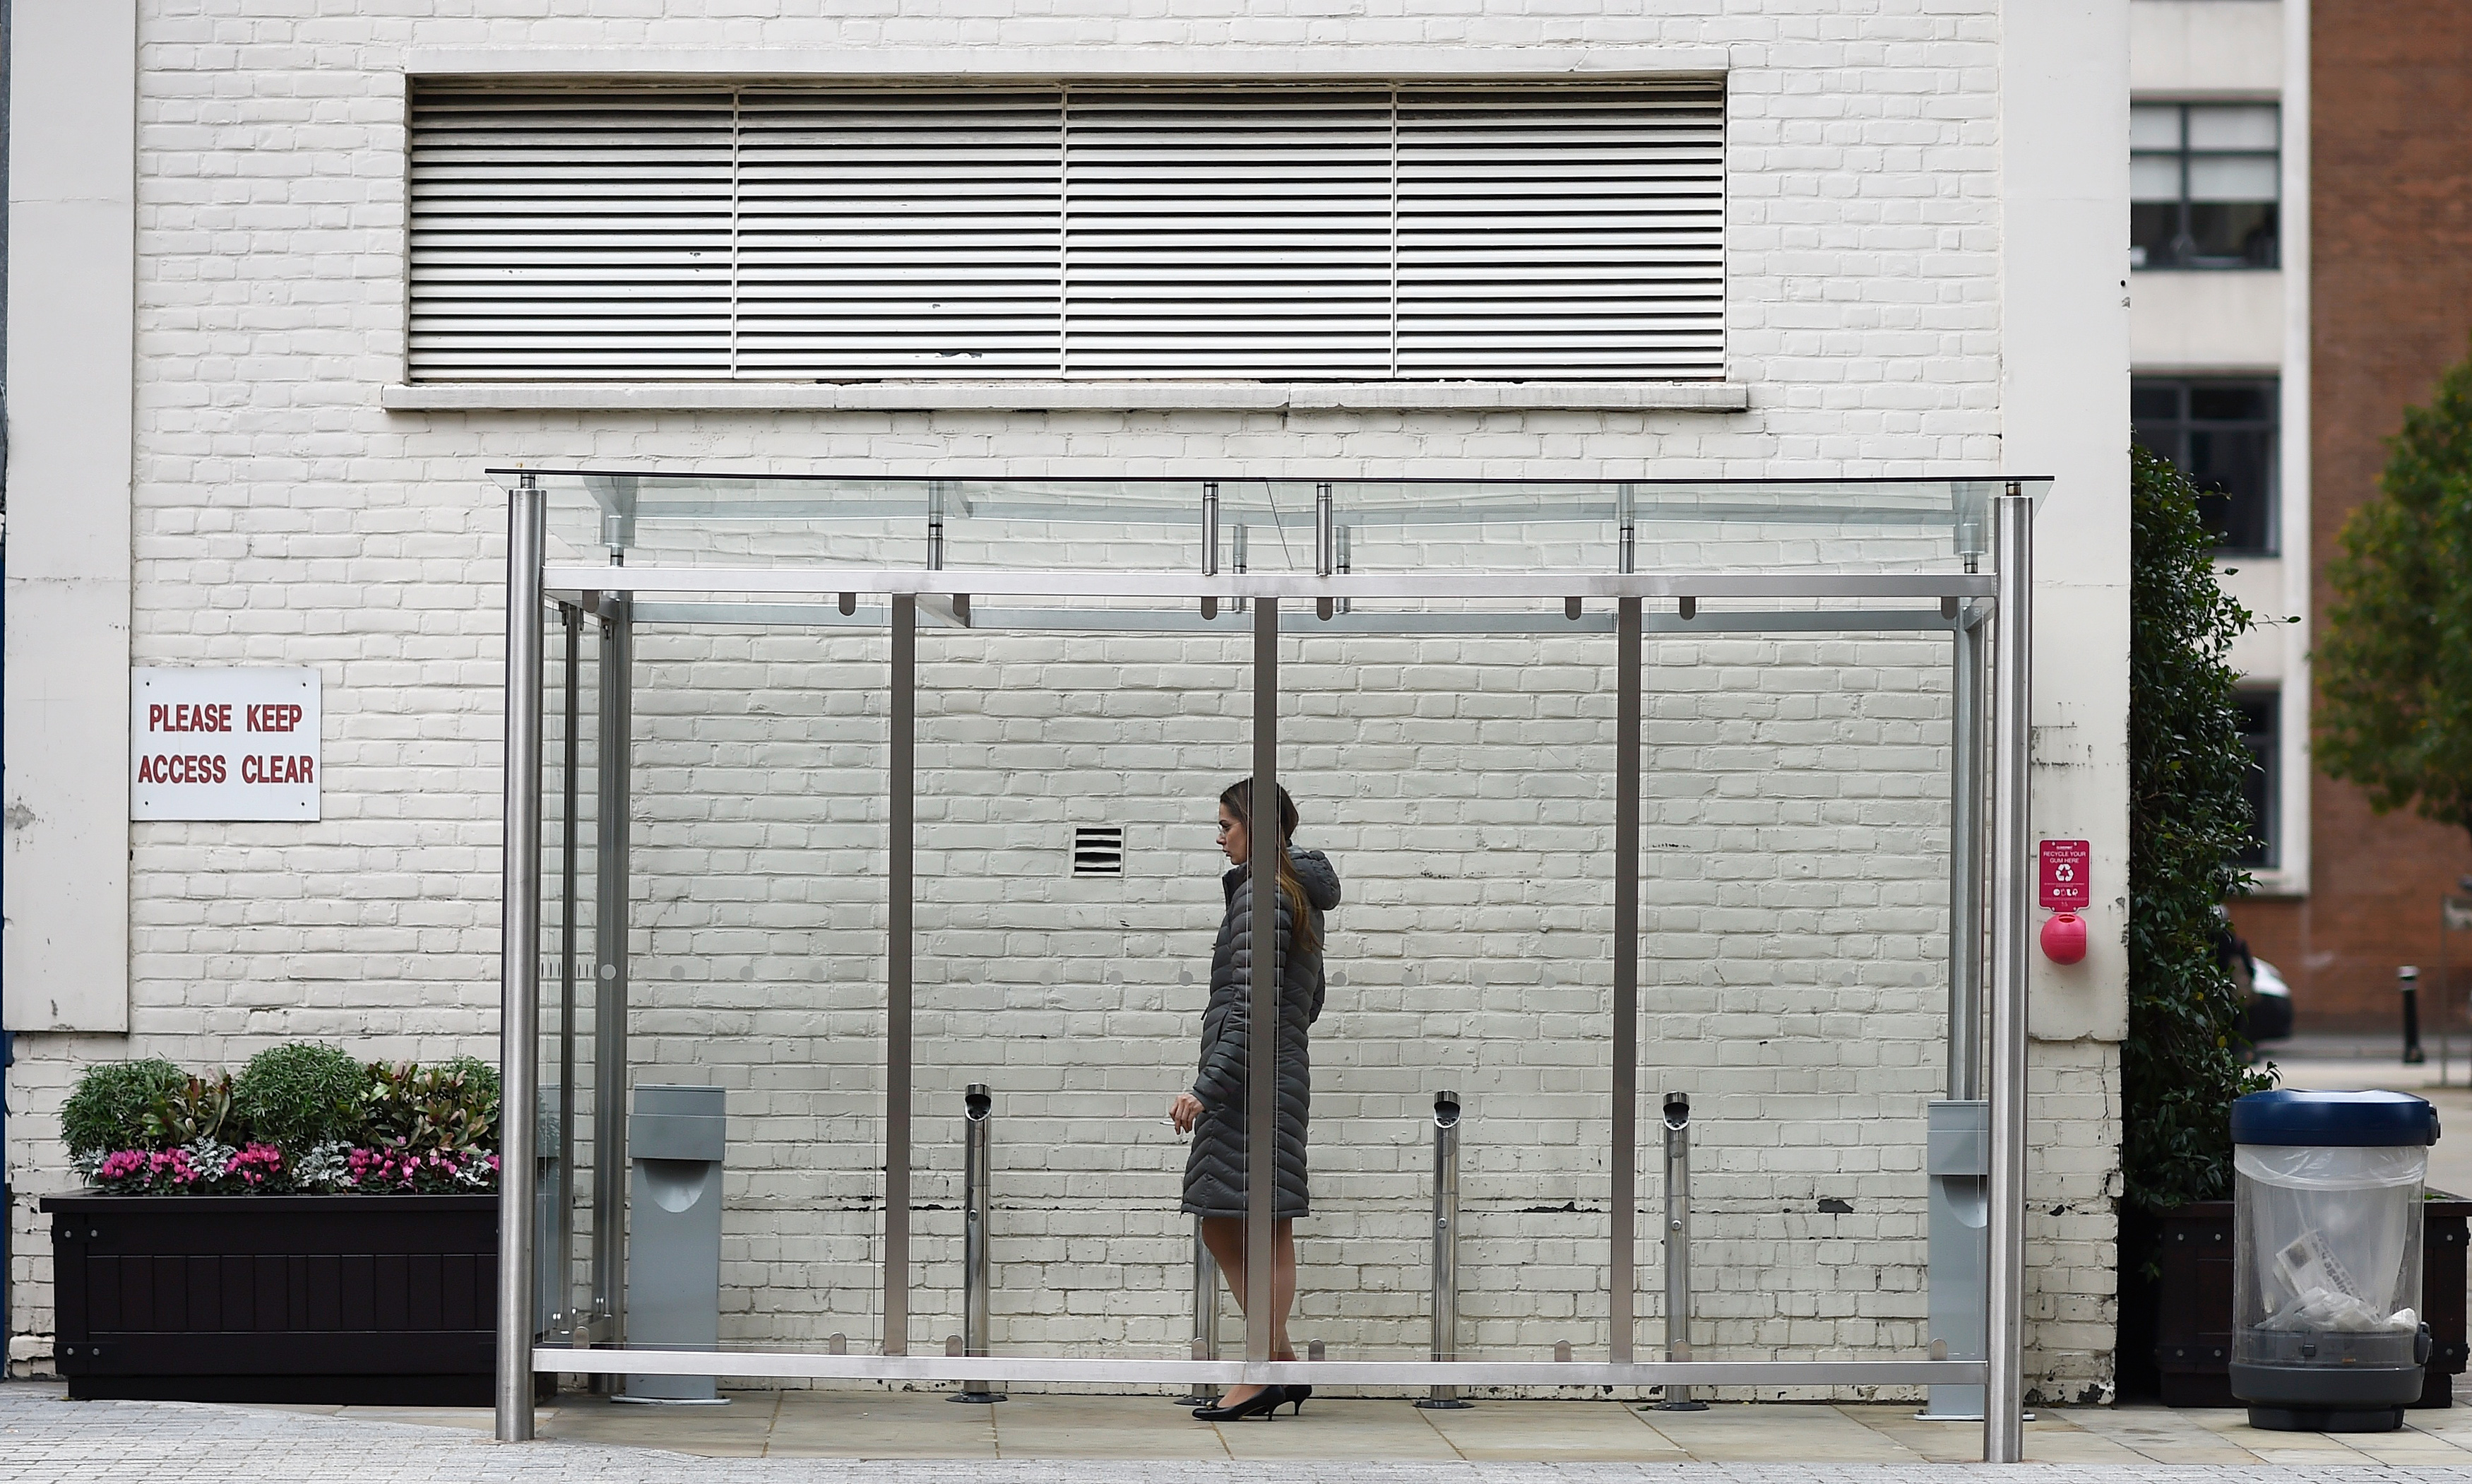 A woman smokes a cigarette in glass shelter for smokers in the City of London